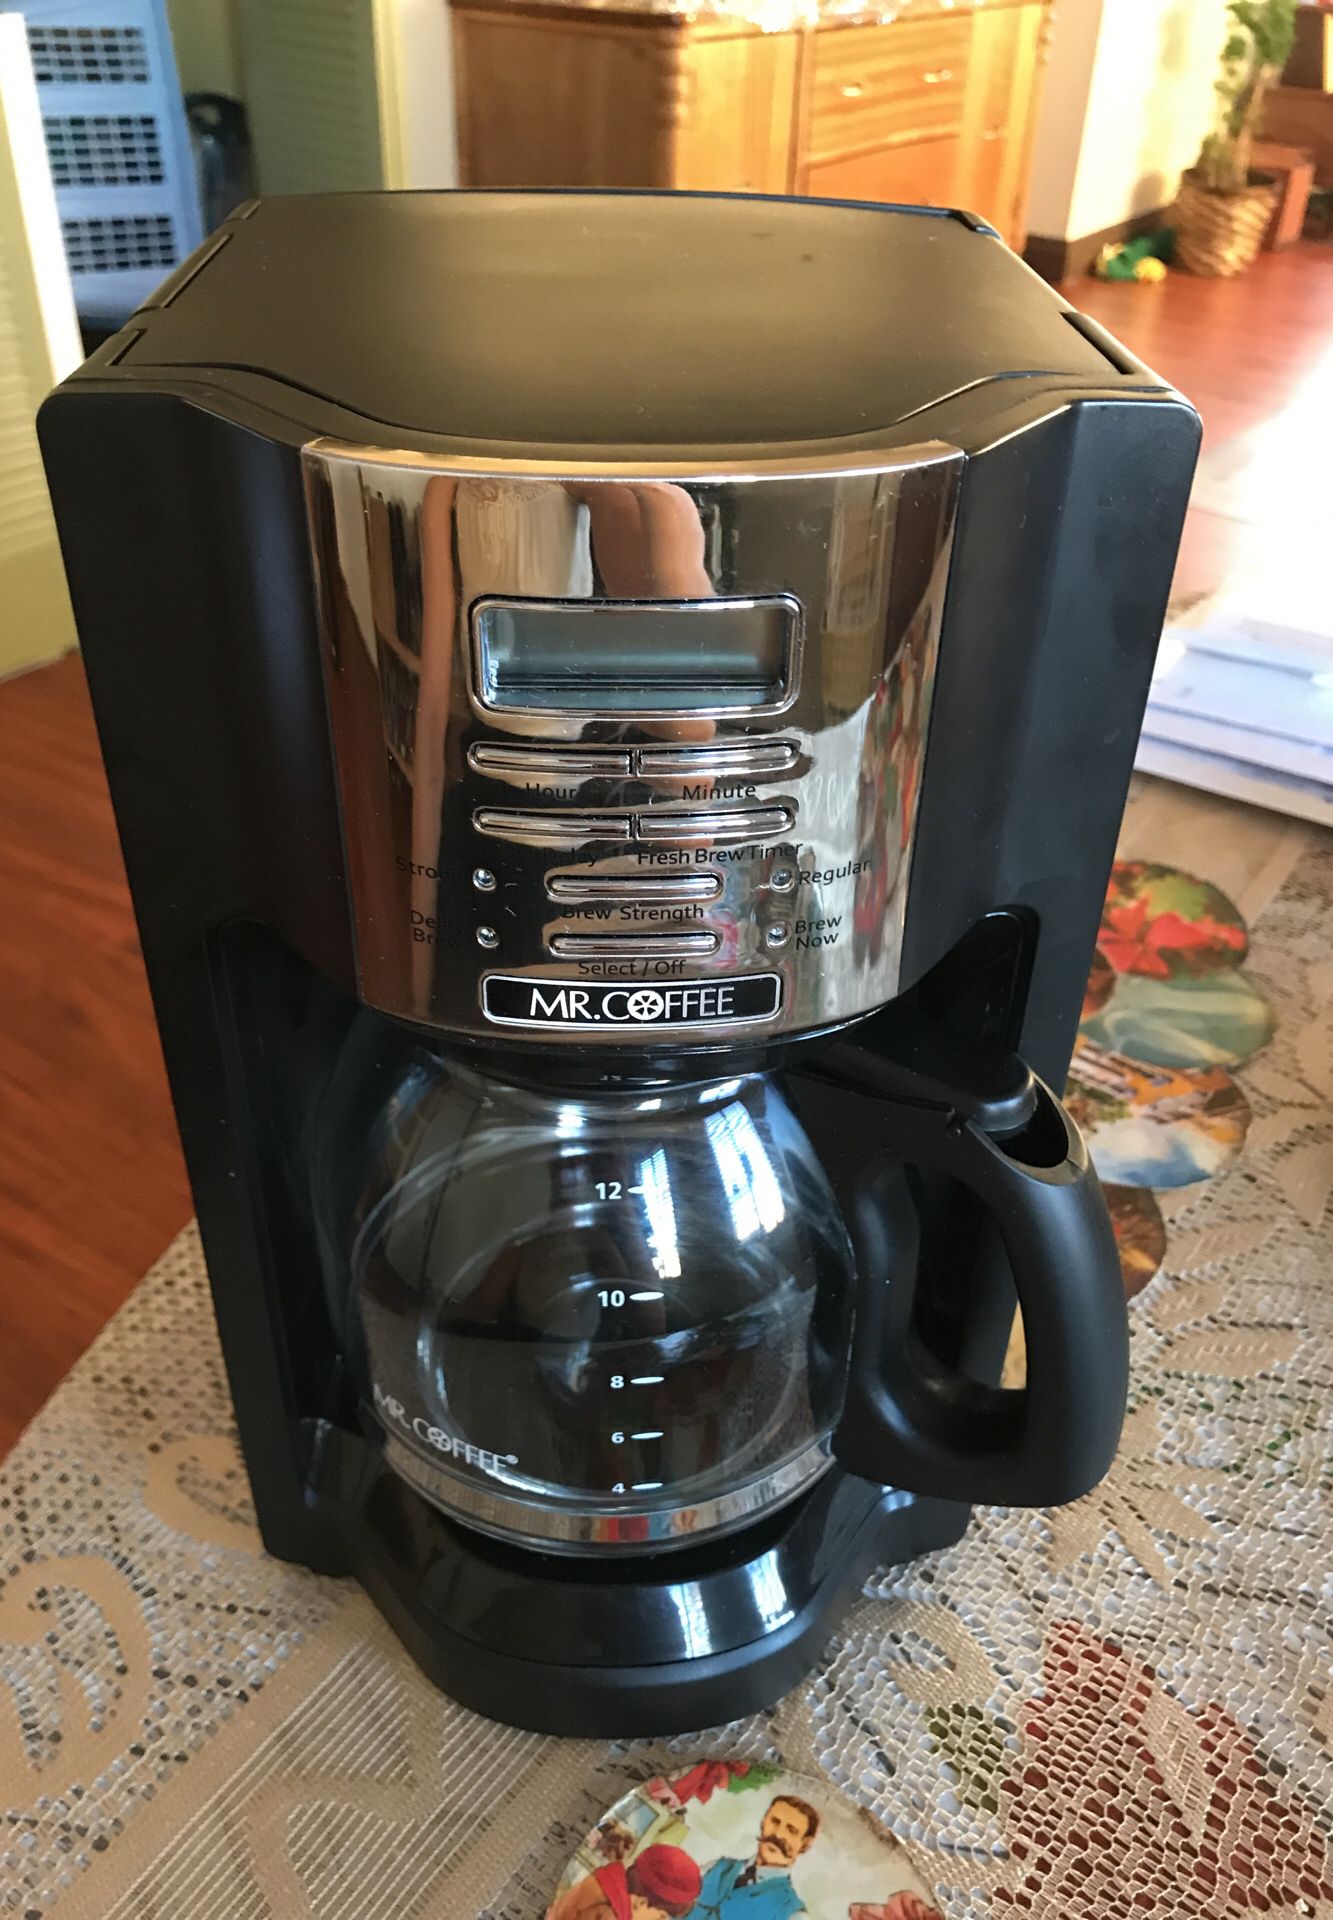 Mr. Coffee Timer 12 cup Maker